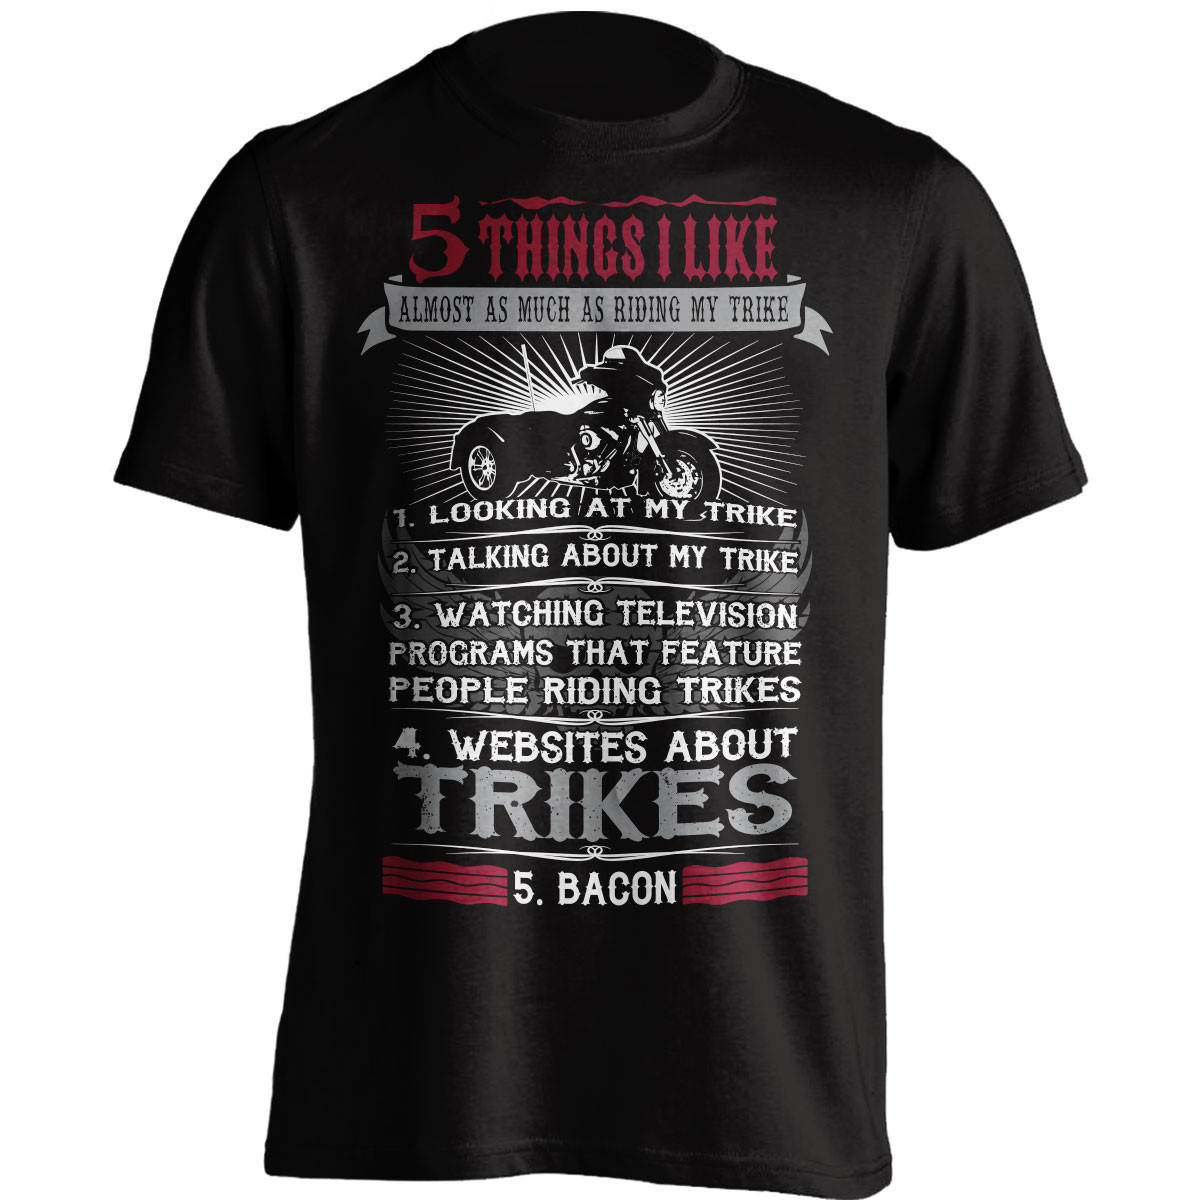 "5 Things I Like Almost As Much As Riding My Trike" T-Shirt